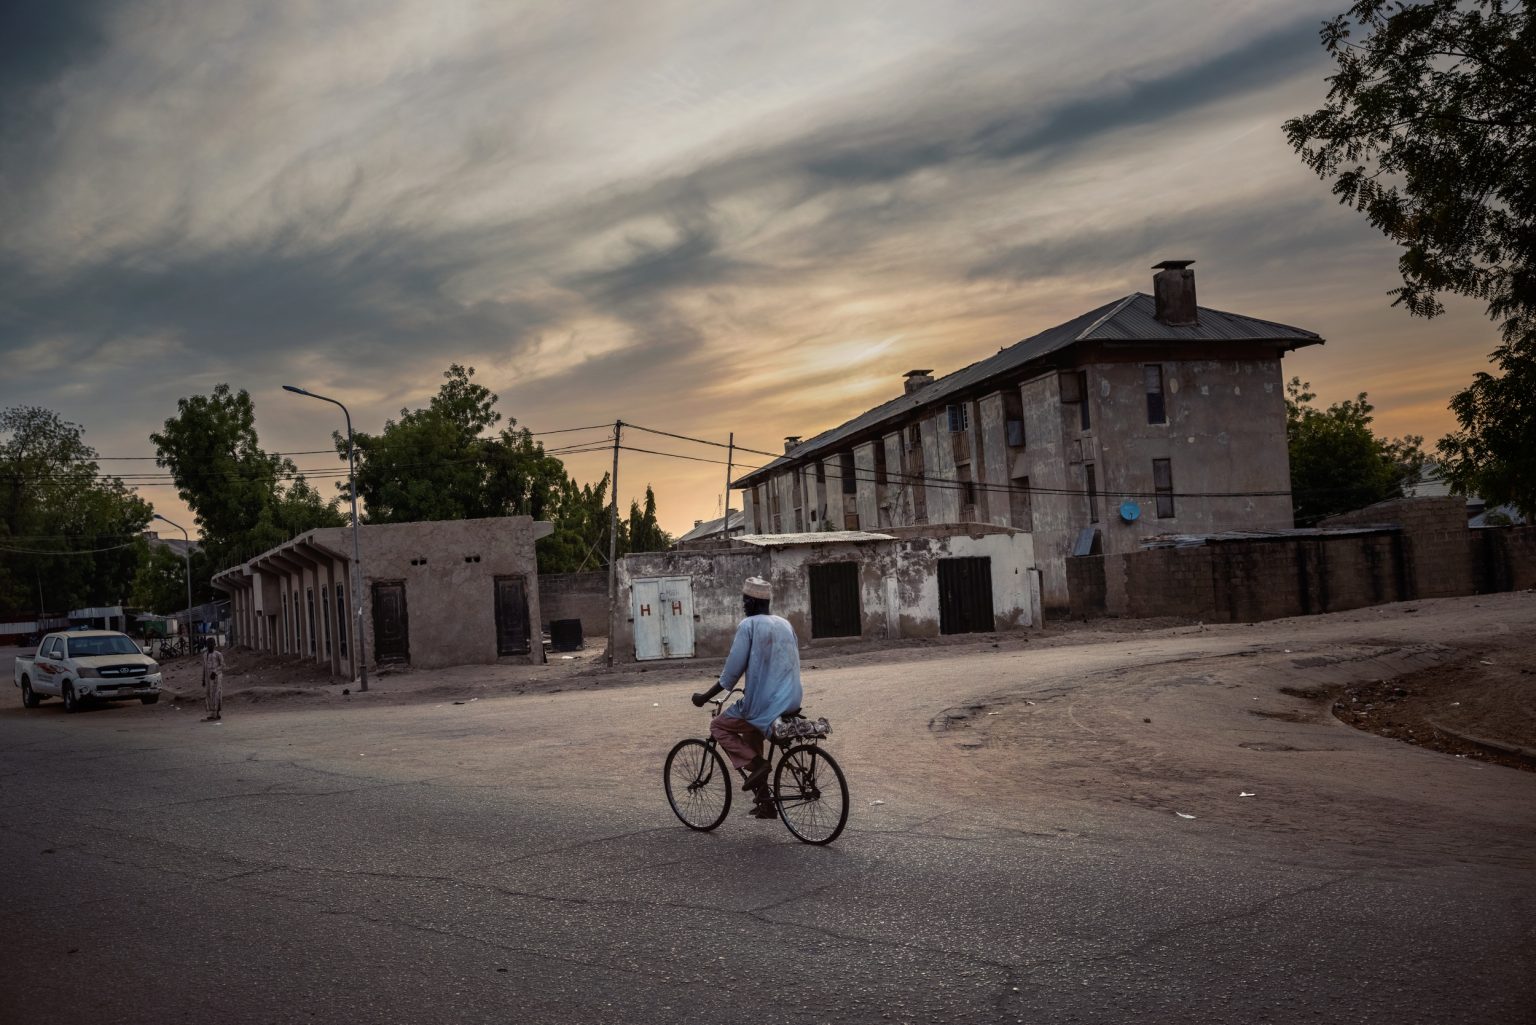 Maiduguri, Nigeria, Africa, May 2021 - A glimpse of Maiduguri, capital city of Borno State, which borders Cameroon, Chad and Niger. Borno State is the most affected by the violent acts of Boko Haram, and up until 2016 Maiduguri has been the epicenter of the insurgency. Today, tens of thousands of internal refugees ( IDP) are flooding into the city due to the violence, and its population doubled to two millions.  Although in town Boko Haram has been declared defeated, occasional attacks to communities are still being reported, and suicide bombers are continuing to target the so-called soft targets ><
Maiduguri, Nigeria, Africa, maggio 2021 -  Uno scorcio di Maiduguri, capitale dello Stato di Borno, che confina con Camerun, Ciad e Niger. Il Borno State è il più colpito dalle violenze di Boko Haram e Maiduguri fino al 2016 è stata l'epicentro della rivolta. Oggi, decine di migliaia di sfollati interni si riversano in città a causa della violenza, la sua popolazione è raddoppiata a due milioni. Anche se in città Boko-Haram è stato dichiarato sconfitto, tuttora vengono costantemente segnalati attacchi sporadici a comunità e attentatori suicidi continuano a colpire i cosiddetti obiettivi soft.